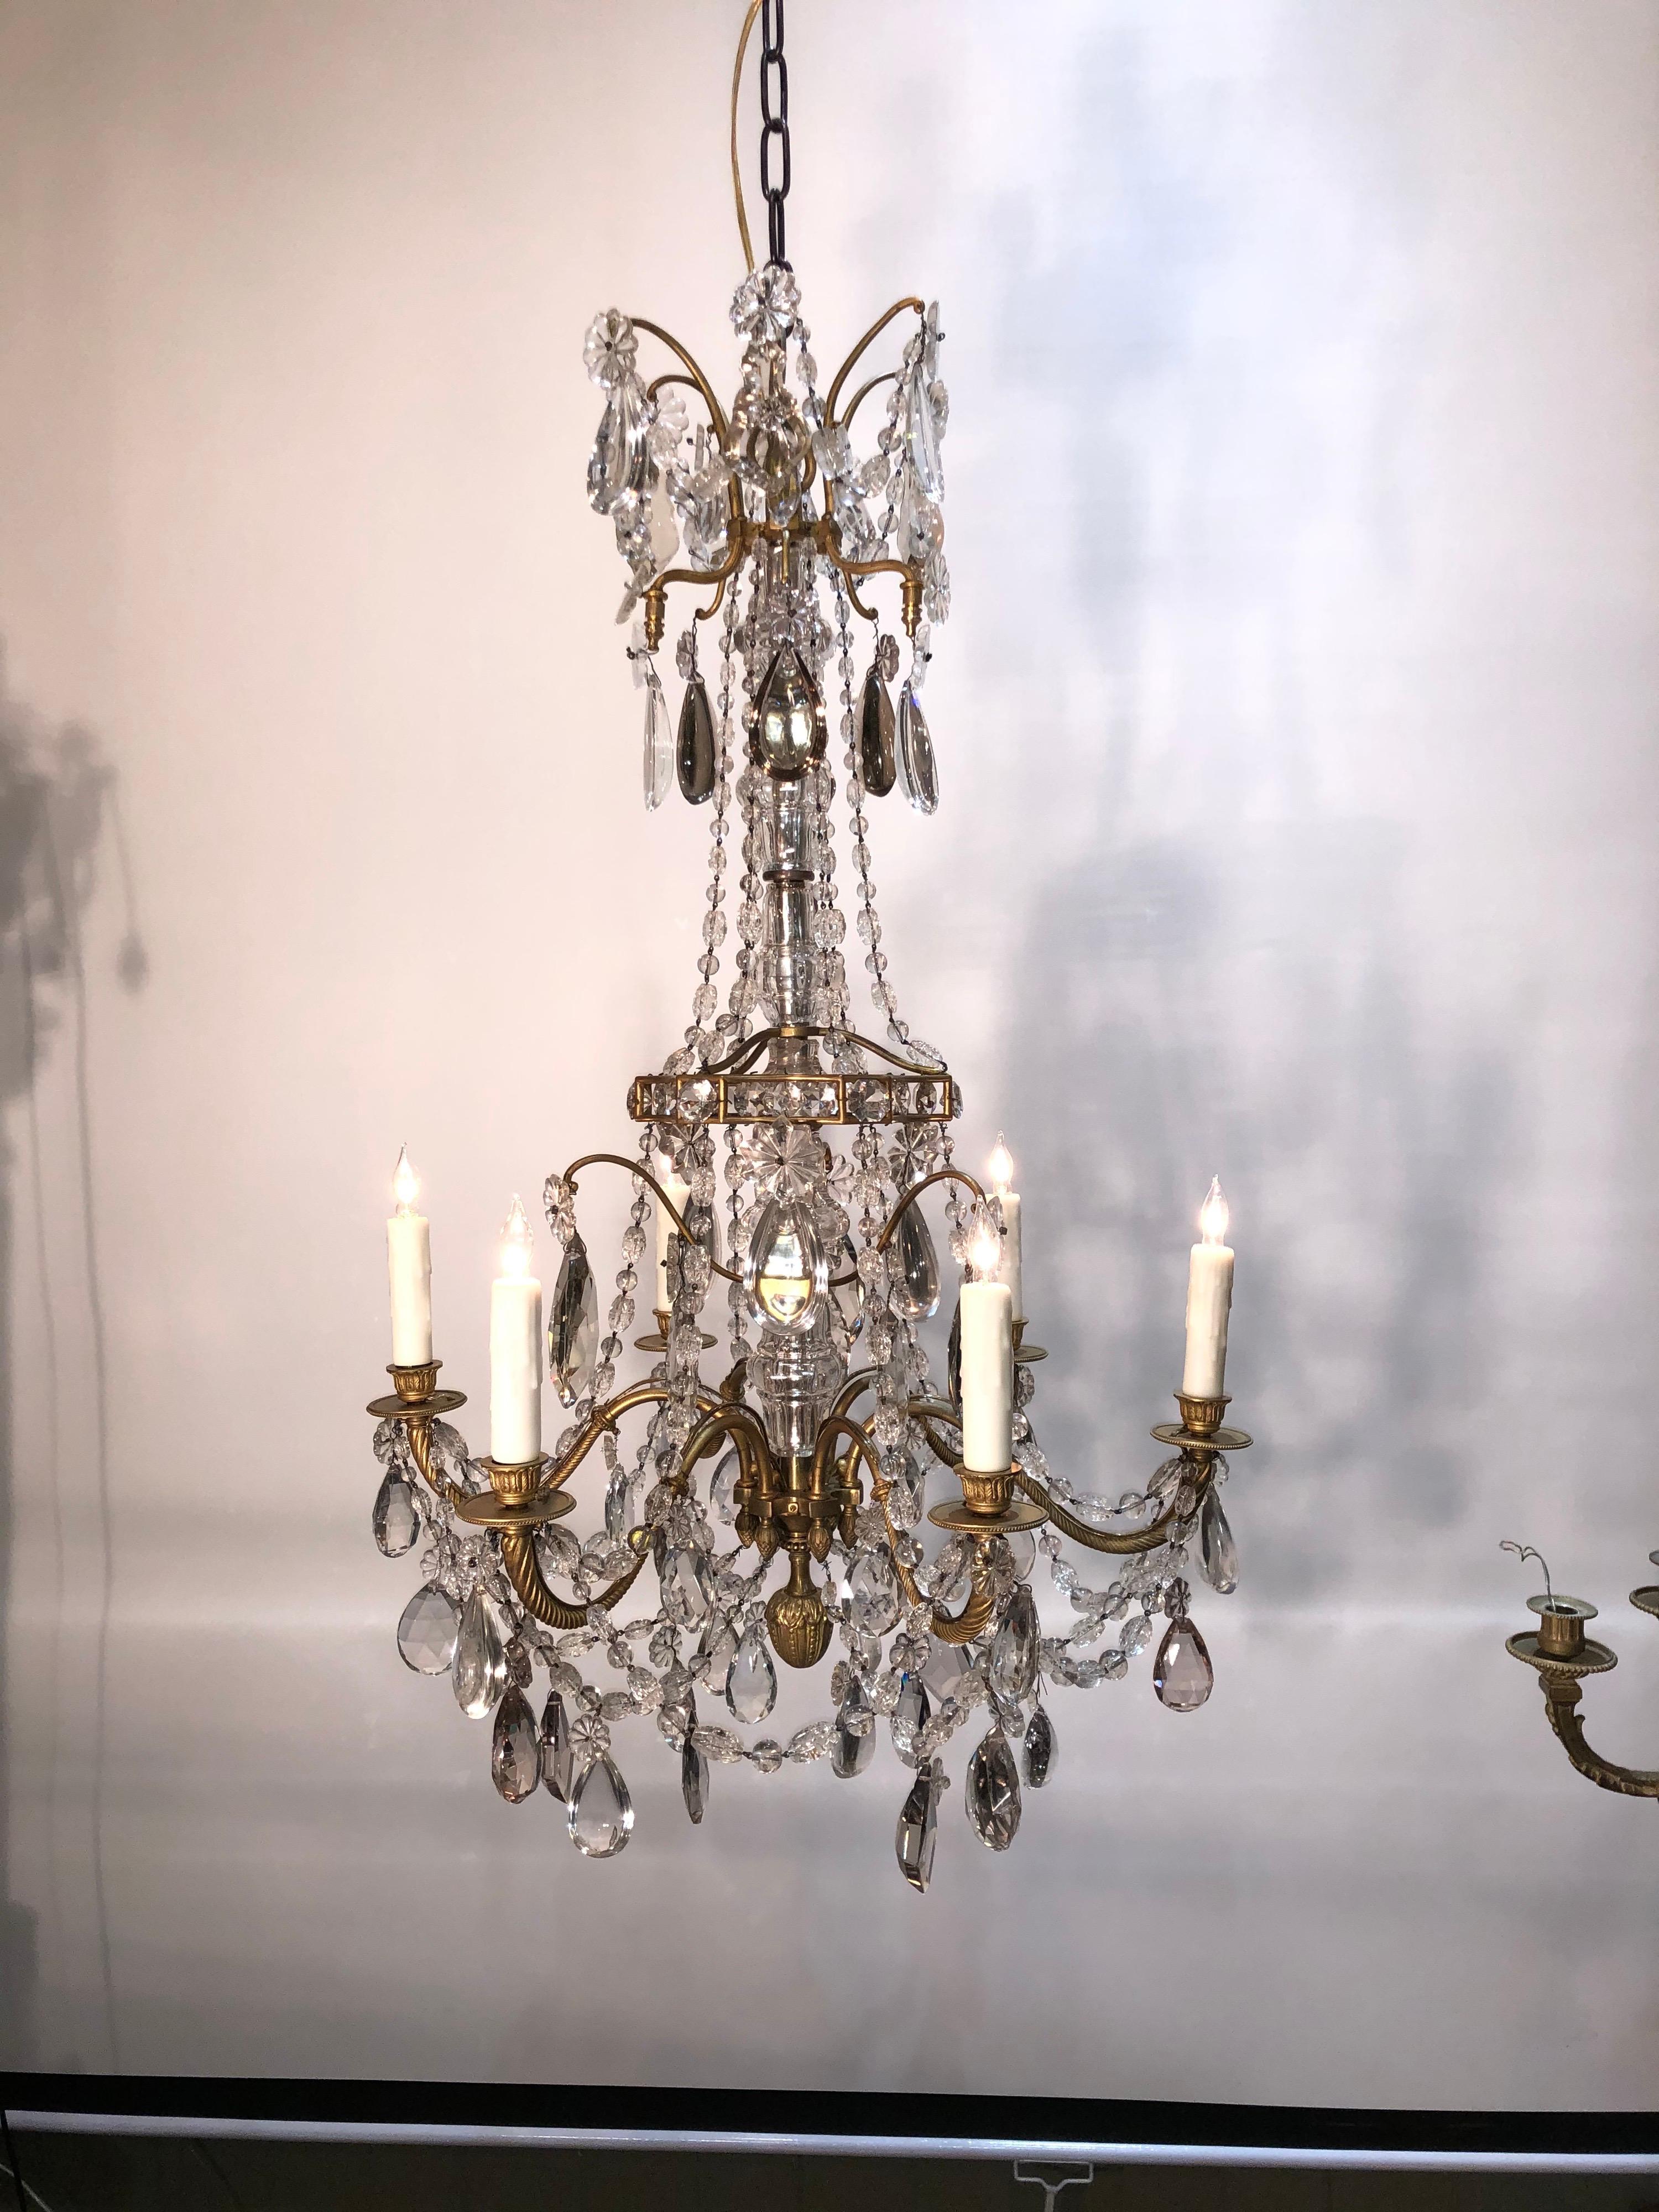 Magnificent 6-light French chandelier from the mid-19th century. Very fine gilt bronze and crystal Louis XV style chandelier. Faceted cut crystal column surrounded with open gilded bronze birdcage frame. 6 branches, all adorned with faceted cut